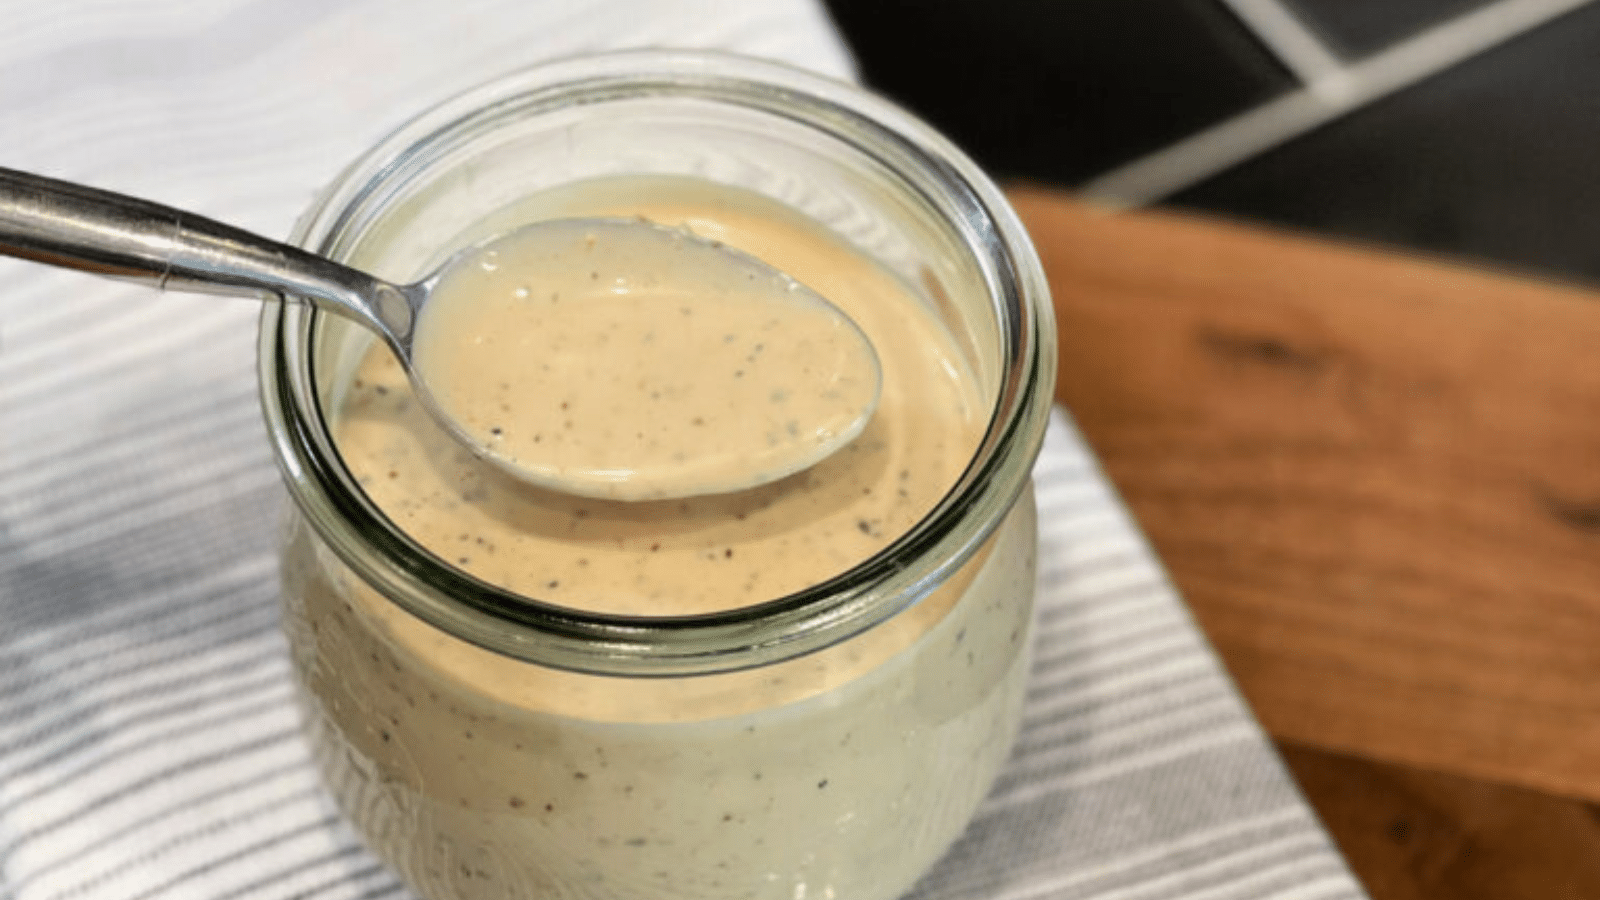 Glass jar with Alabama White BBQ Sauce and spoon dipping sauce out of jar